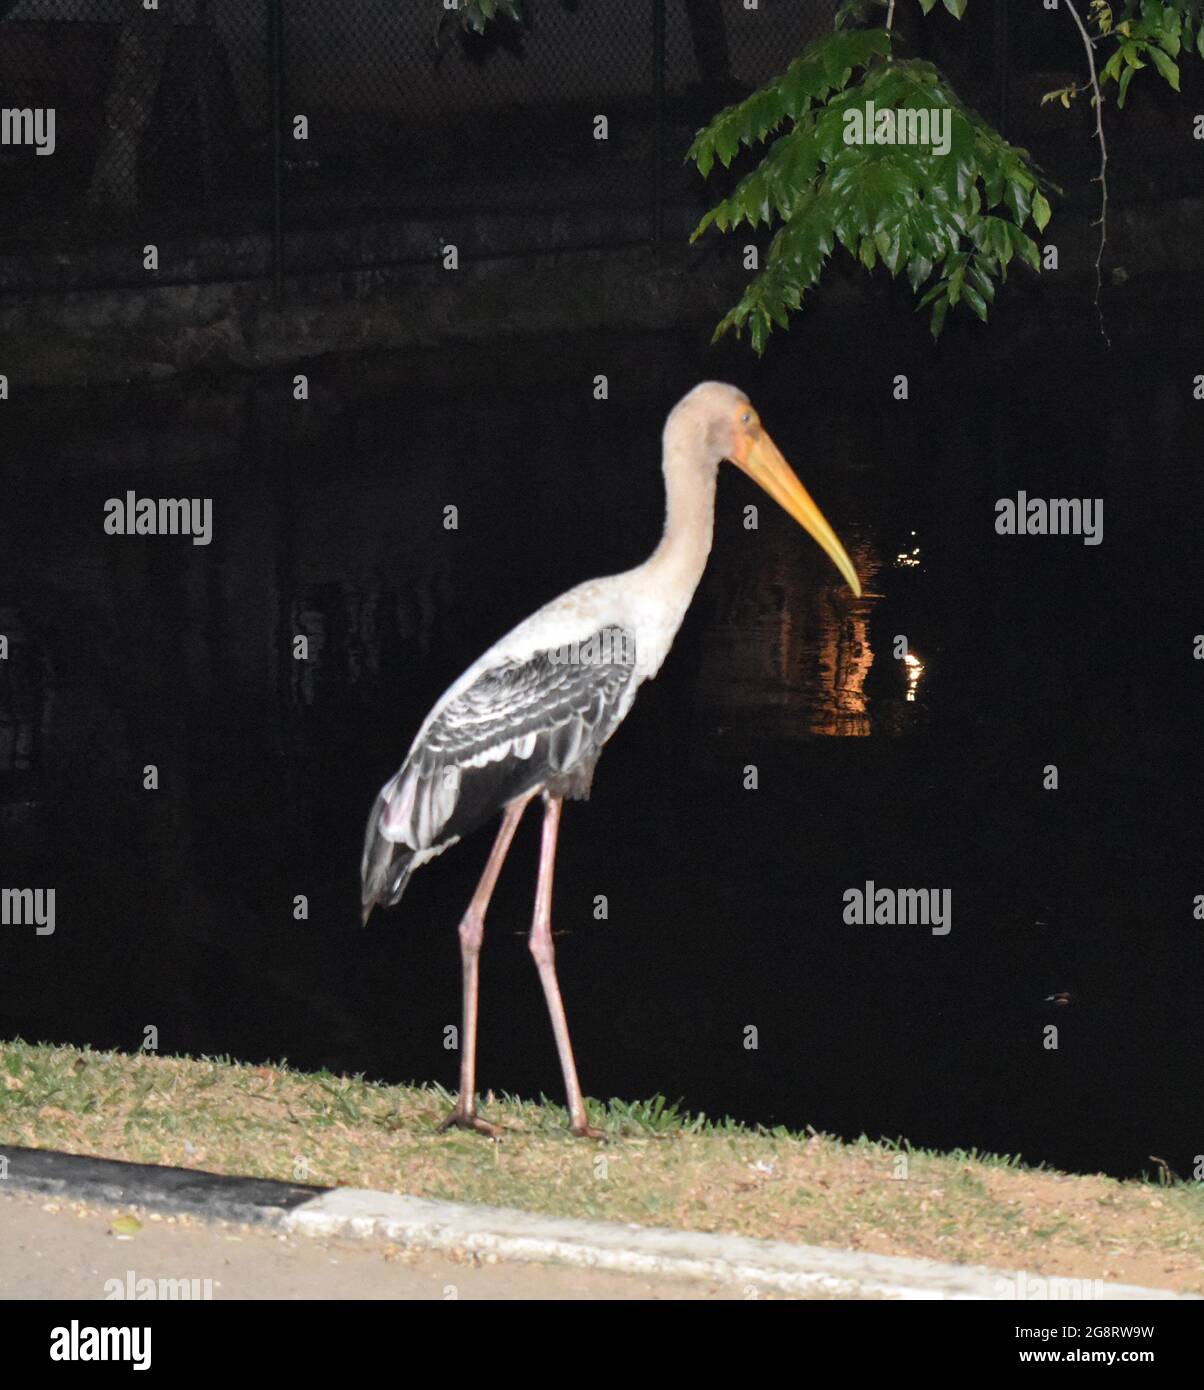 Storks are large, long-legged, long-necked wading birds with long, stout bills. They belong to the family called Ciconiidae, and make up the order Ciconiiformes. Ciconiiformes previously included a number of other families, such as herons and ibises, but those families have been moved to other orders. Colombo, Sri Lanka. Stock Photo